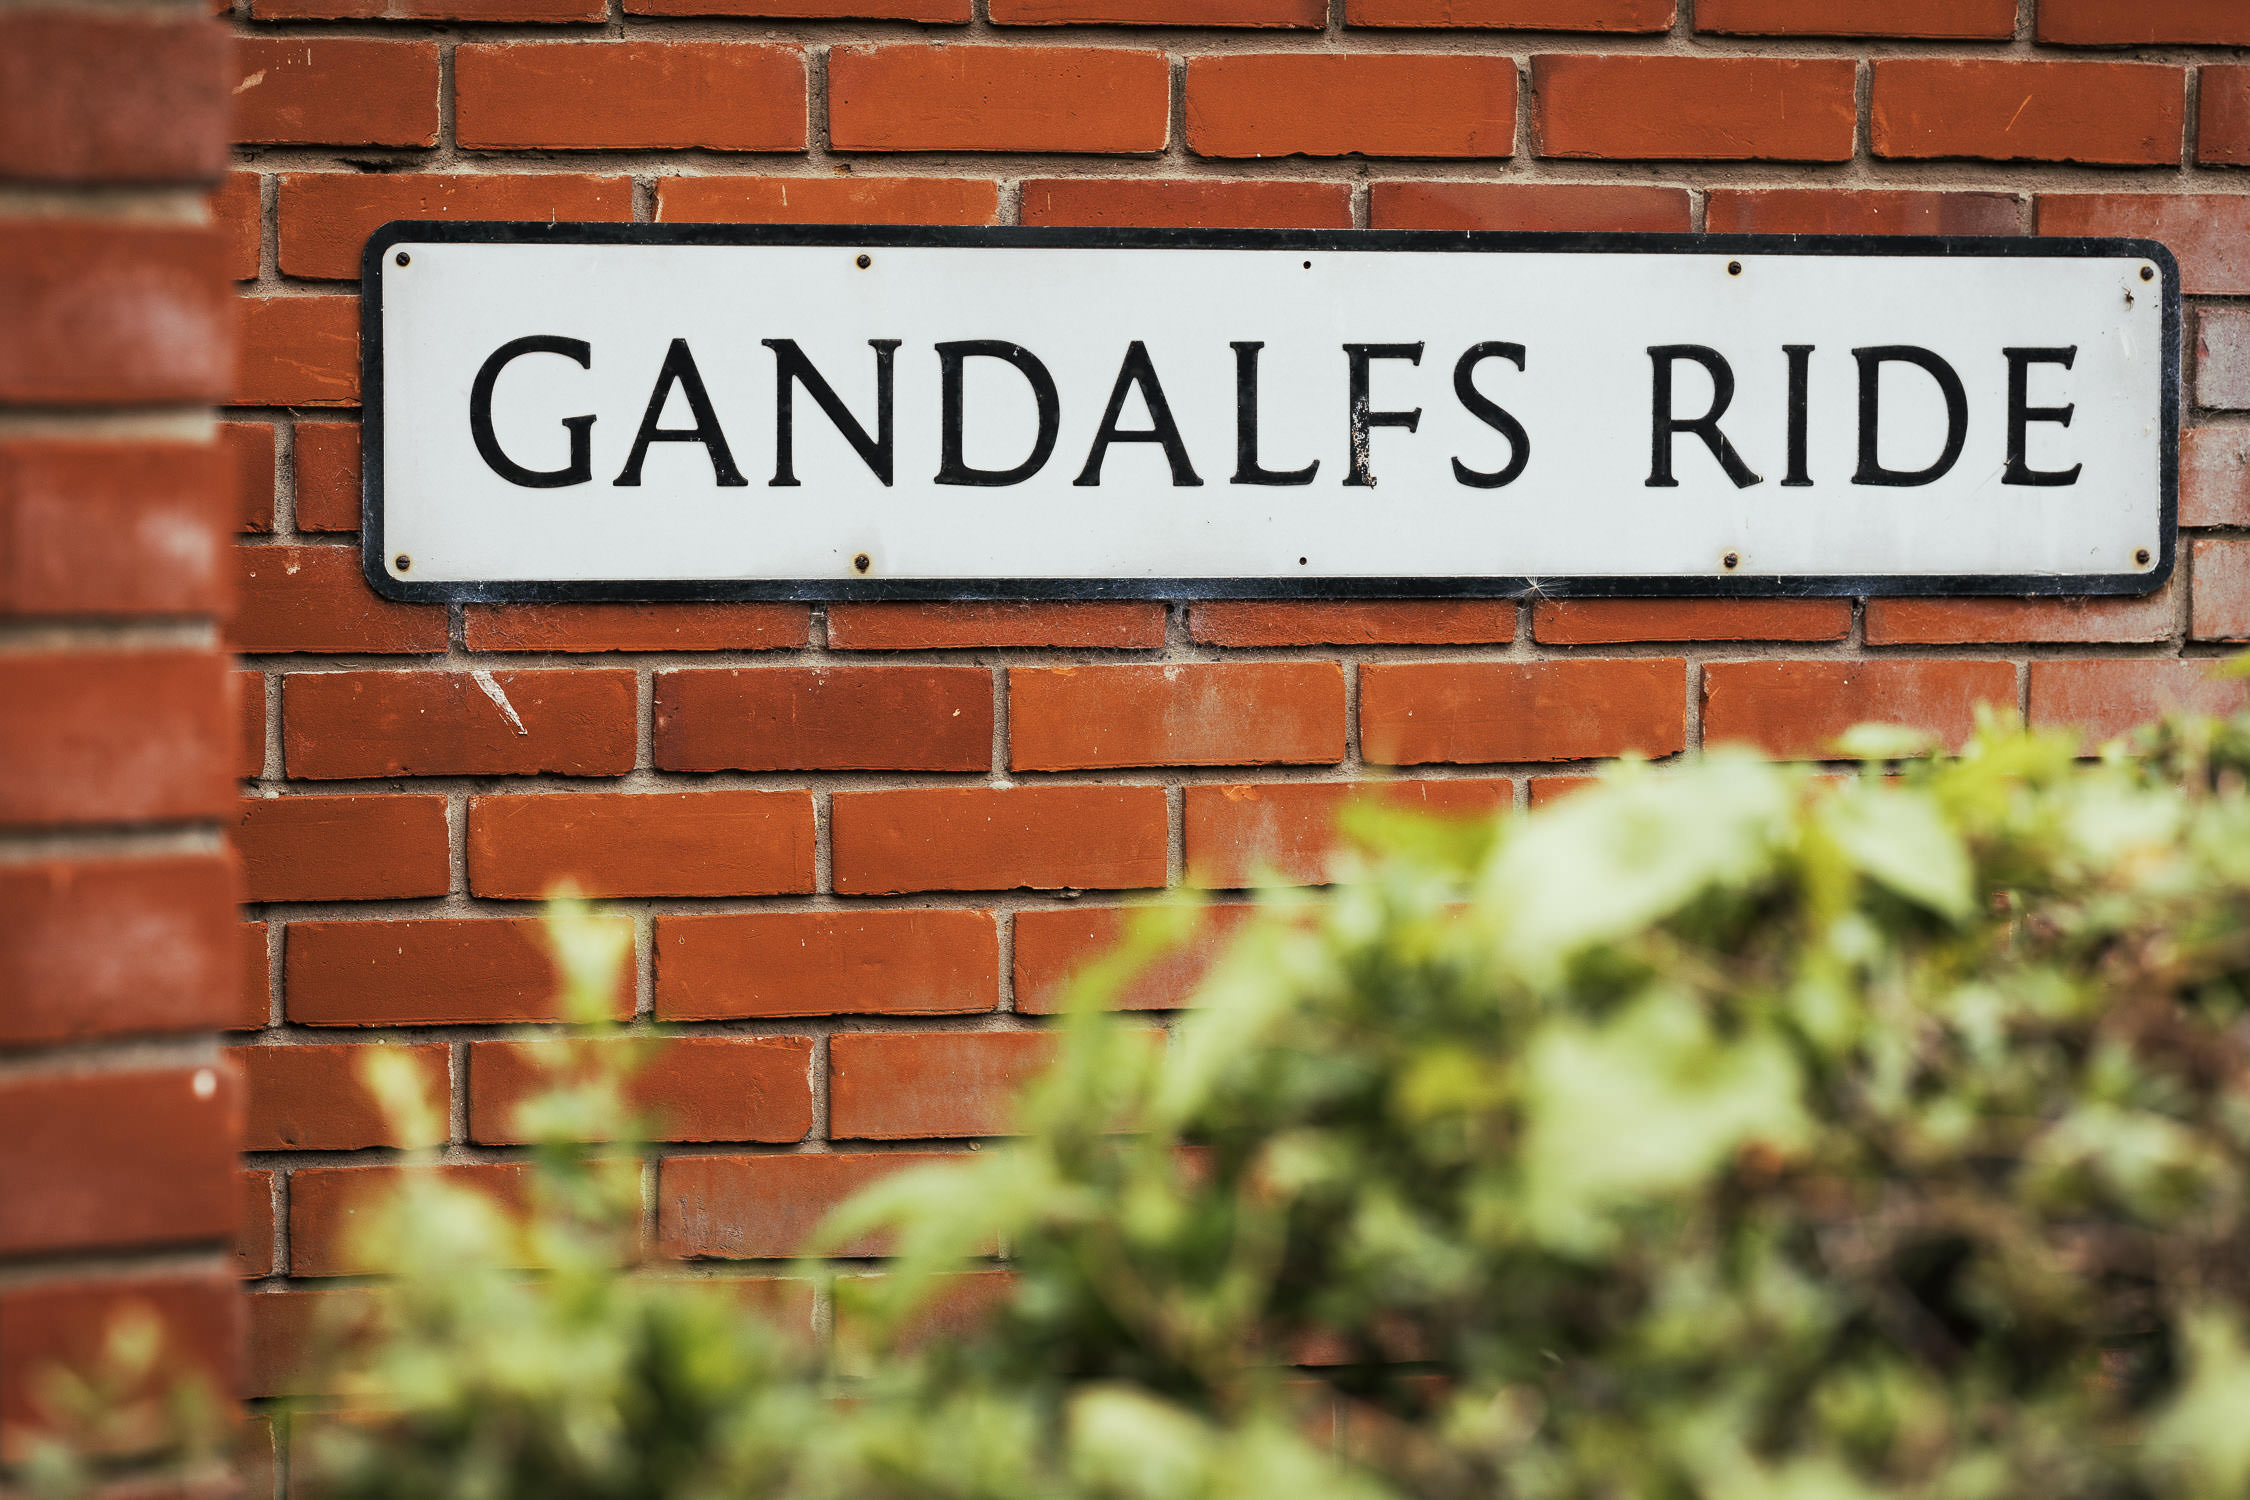 Gandalf's Ride street sign in South Woodham Ferrers near Chelmsford. The sign is on a wall of red bricks.